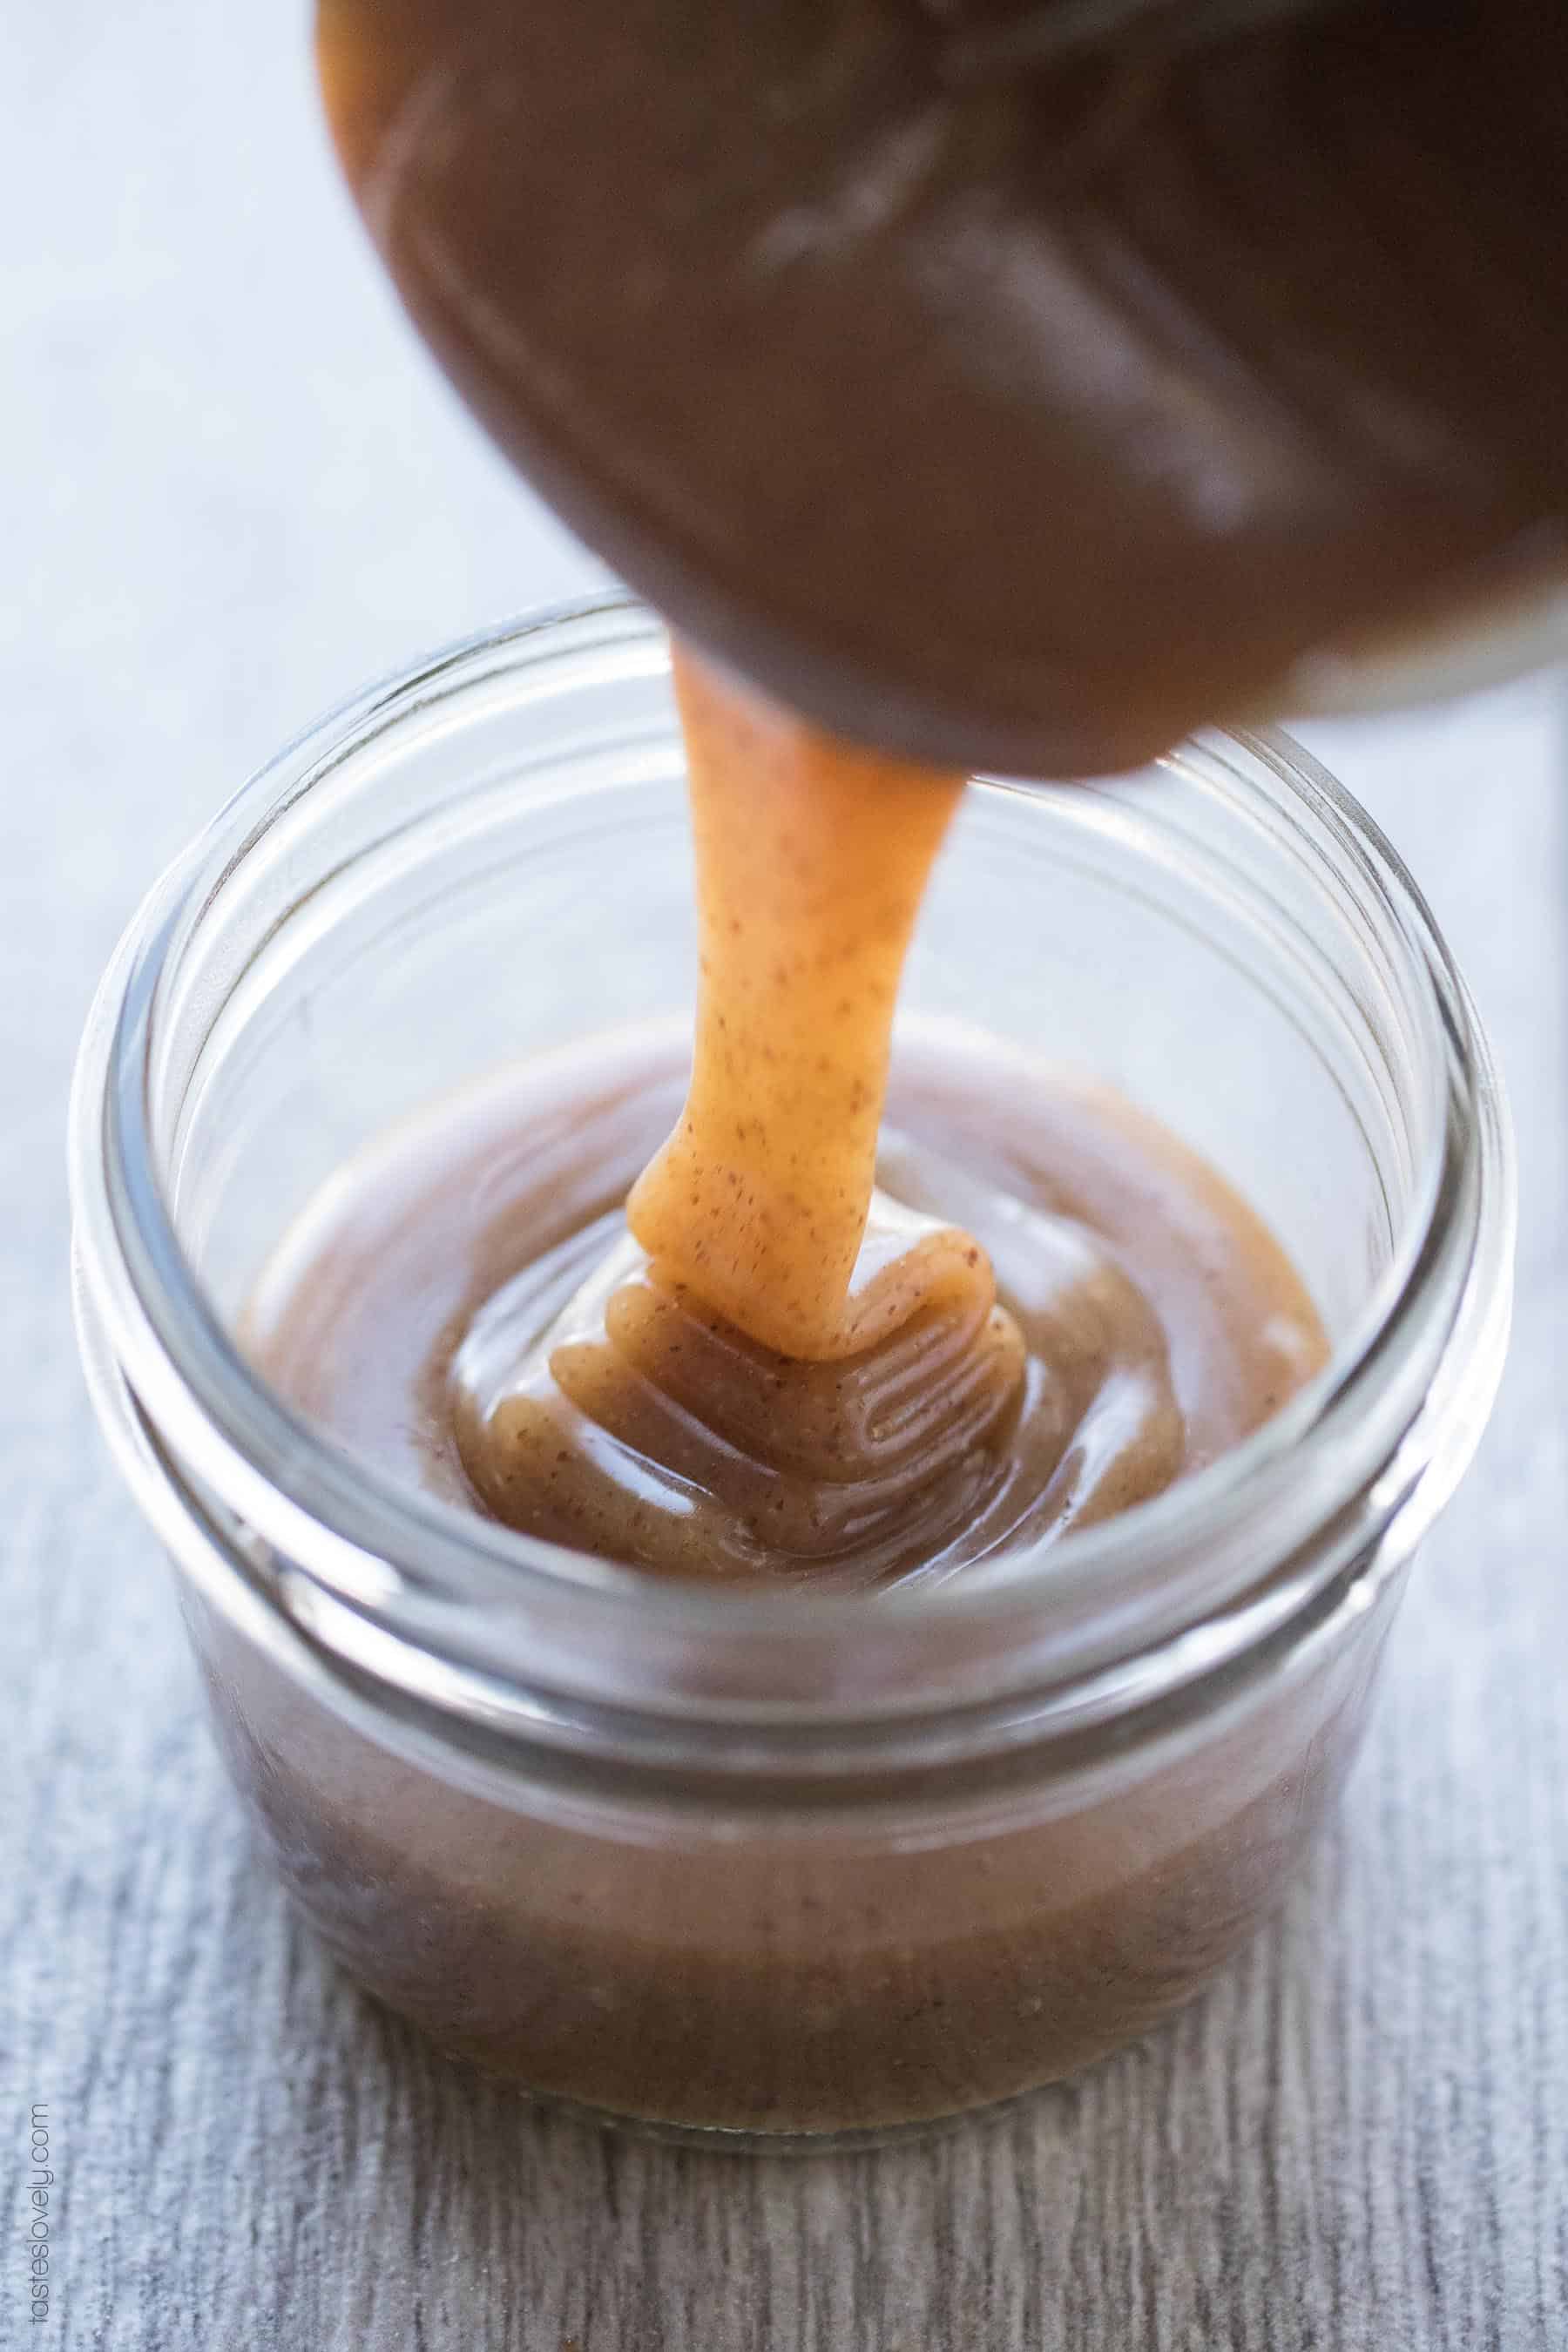 Paleo Salted Caramel Sauce - a 3 minute microwave caramel sauce that is paleo, dairy free, refined sugar free, gluten free and vegan!